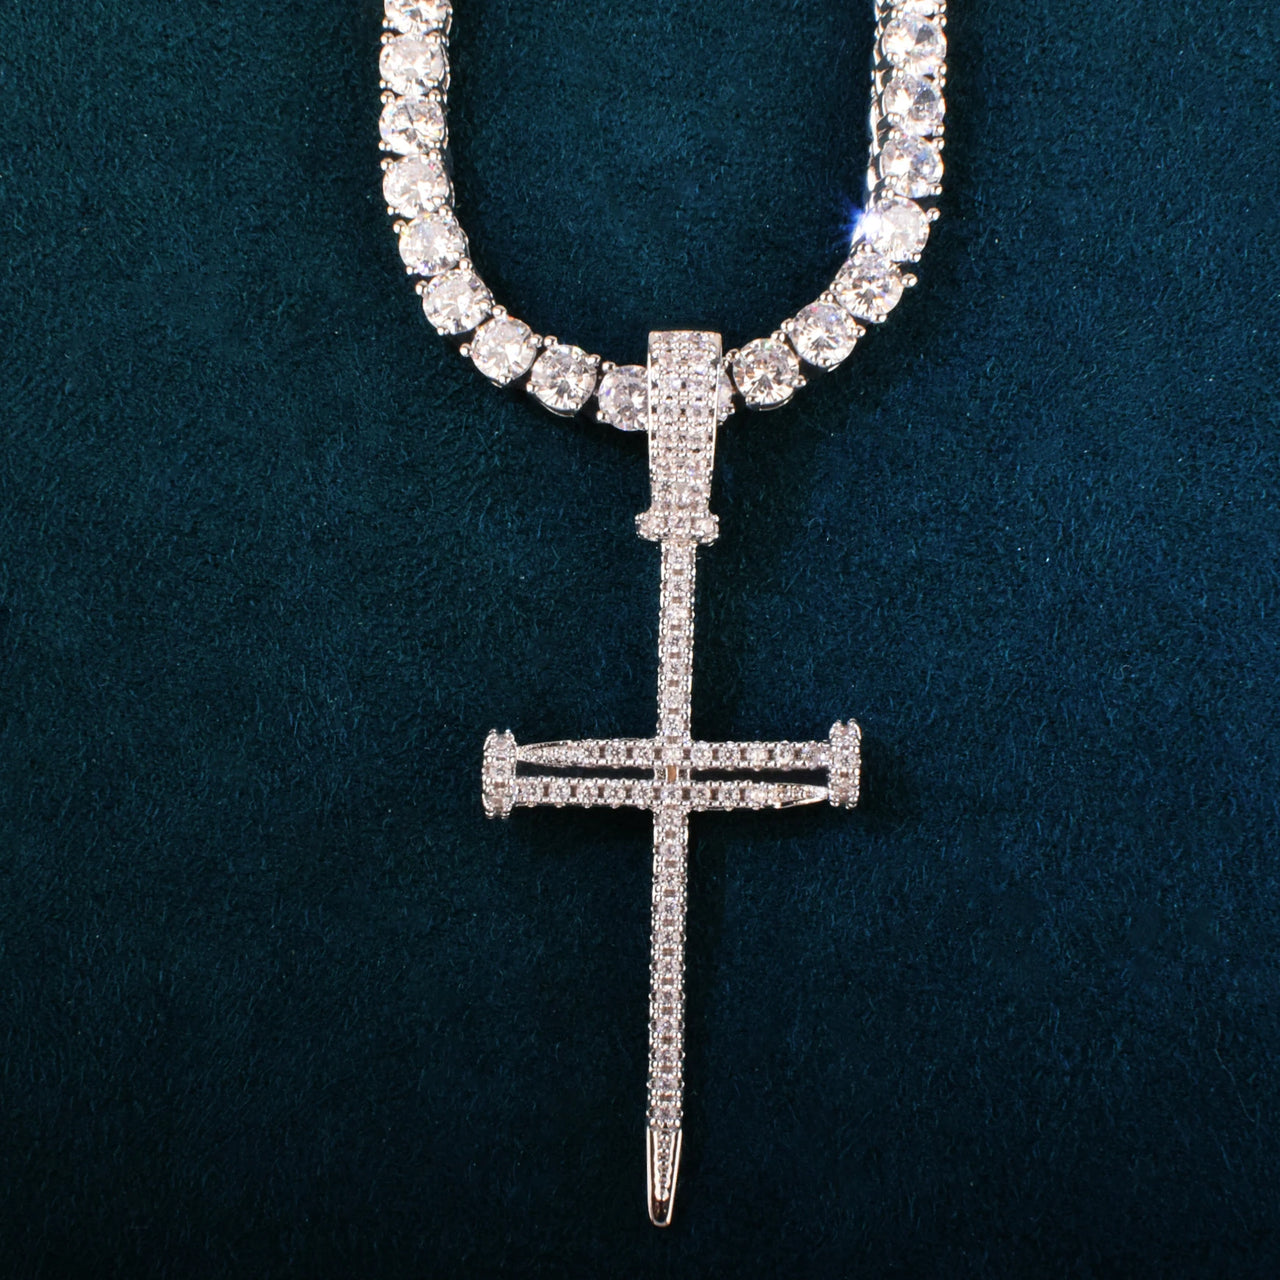 Small Nail Cross Pendant - Different Drips